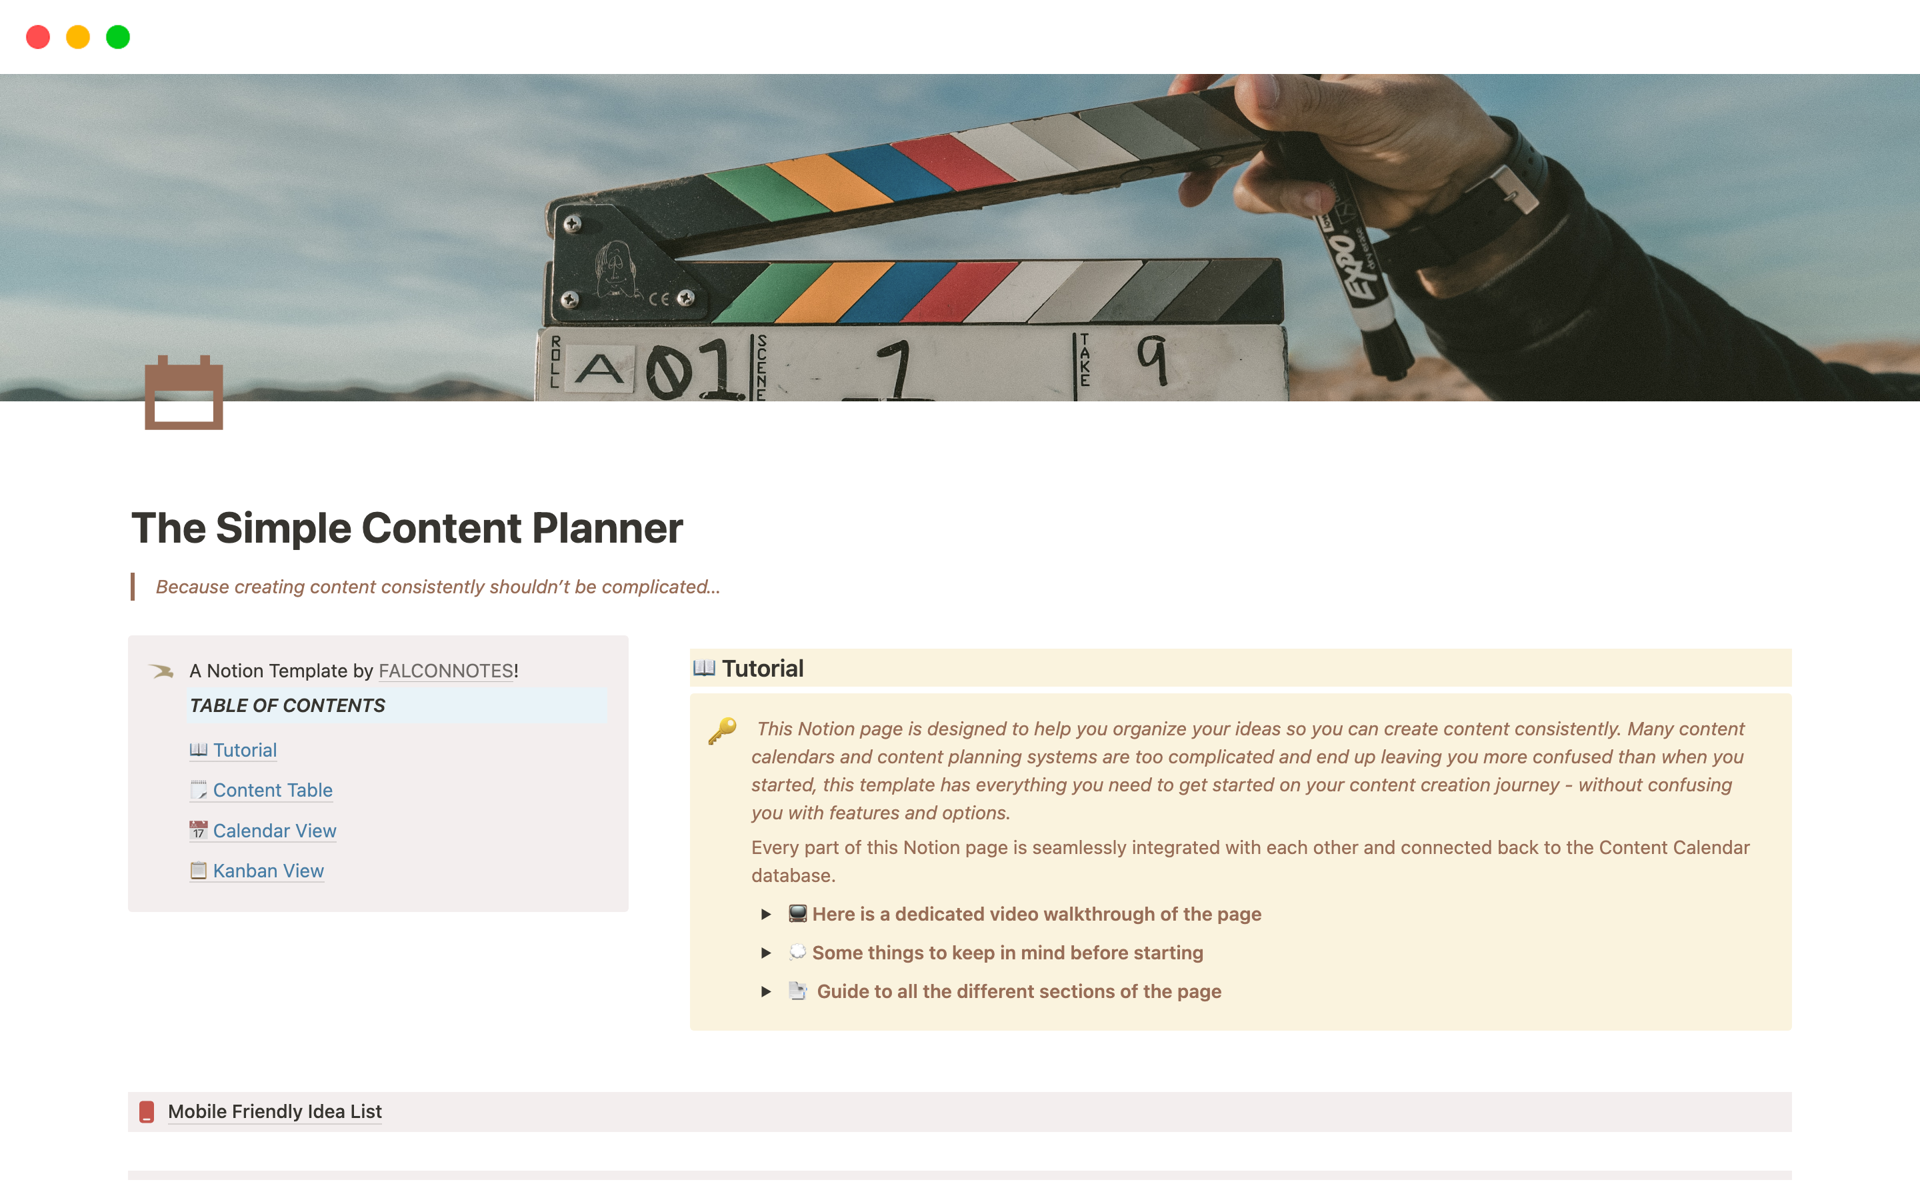 Supercharge Your Content Creation Journey with the Simple Content Planner Notion Template!